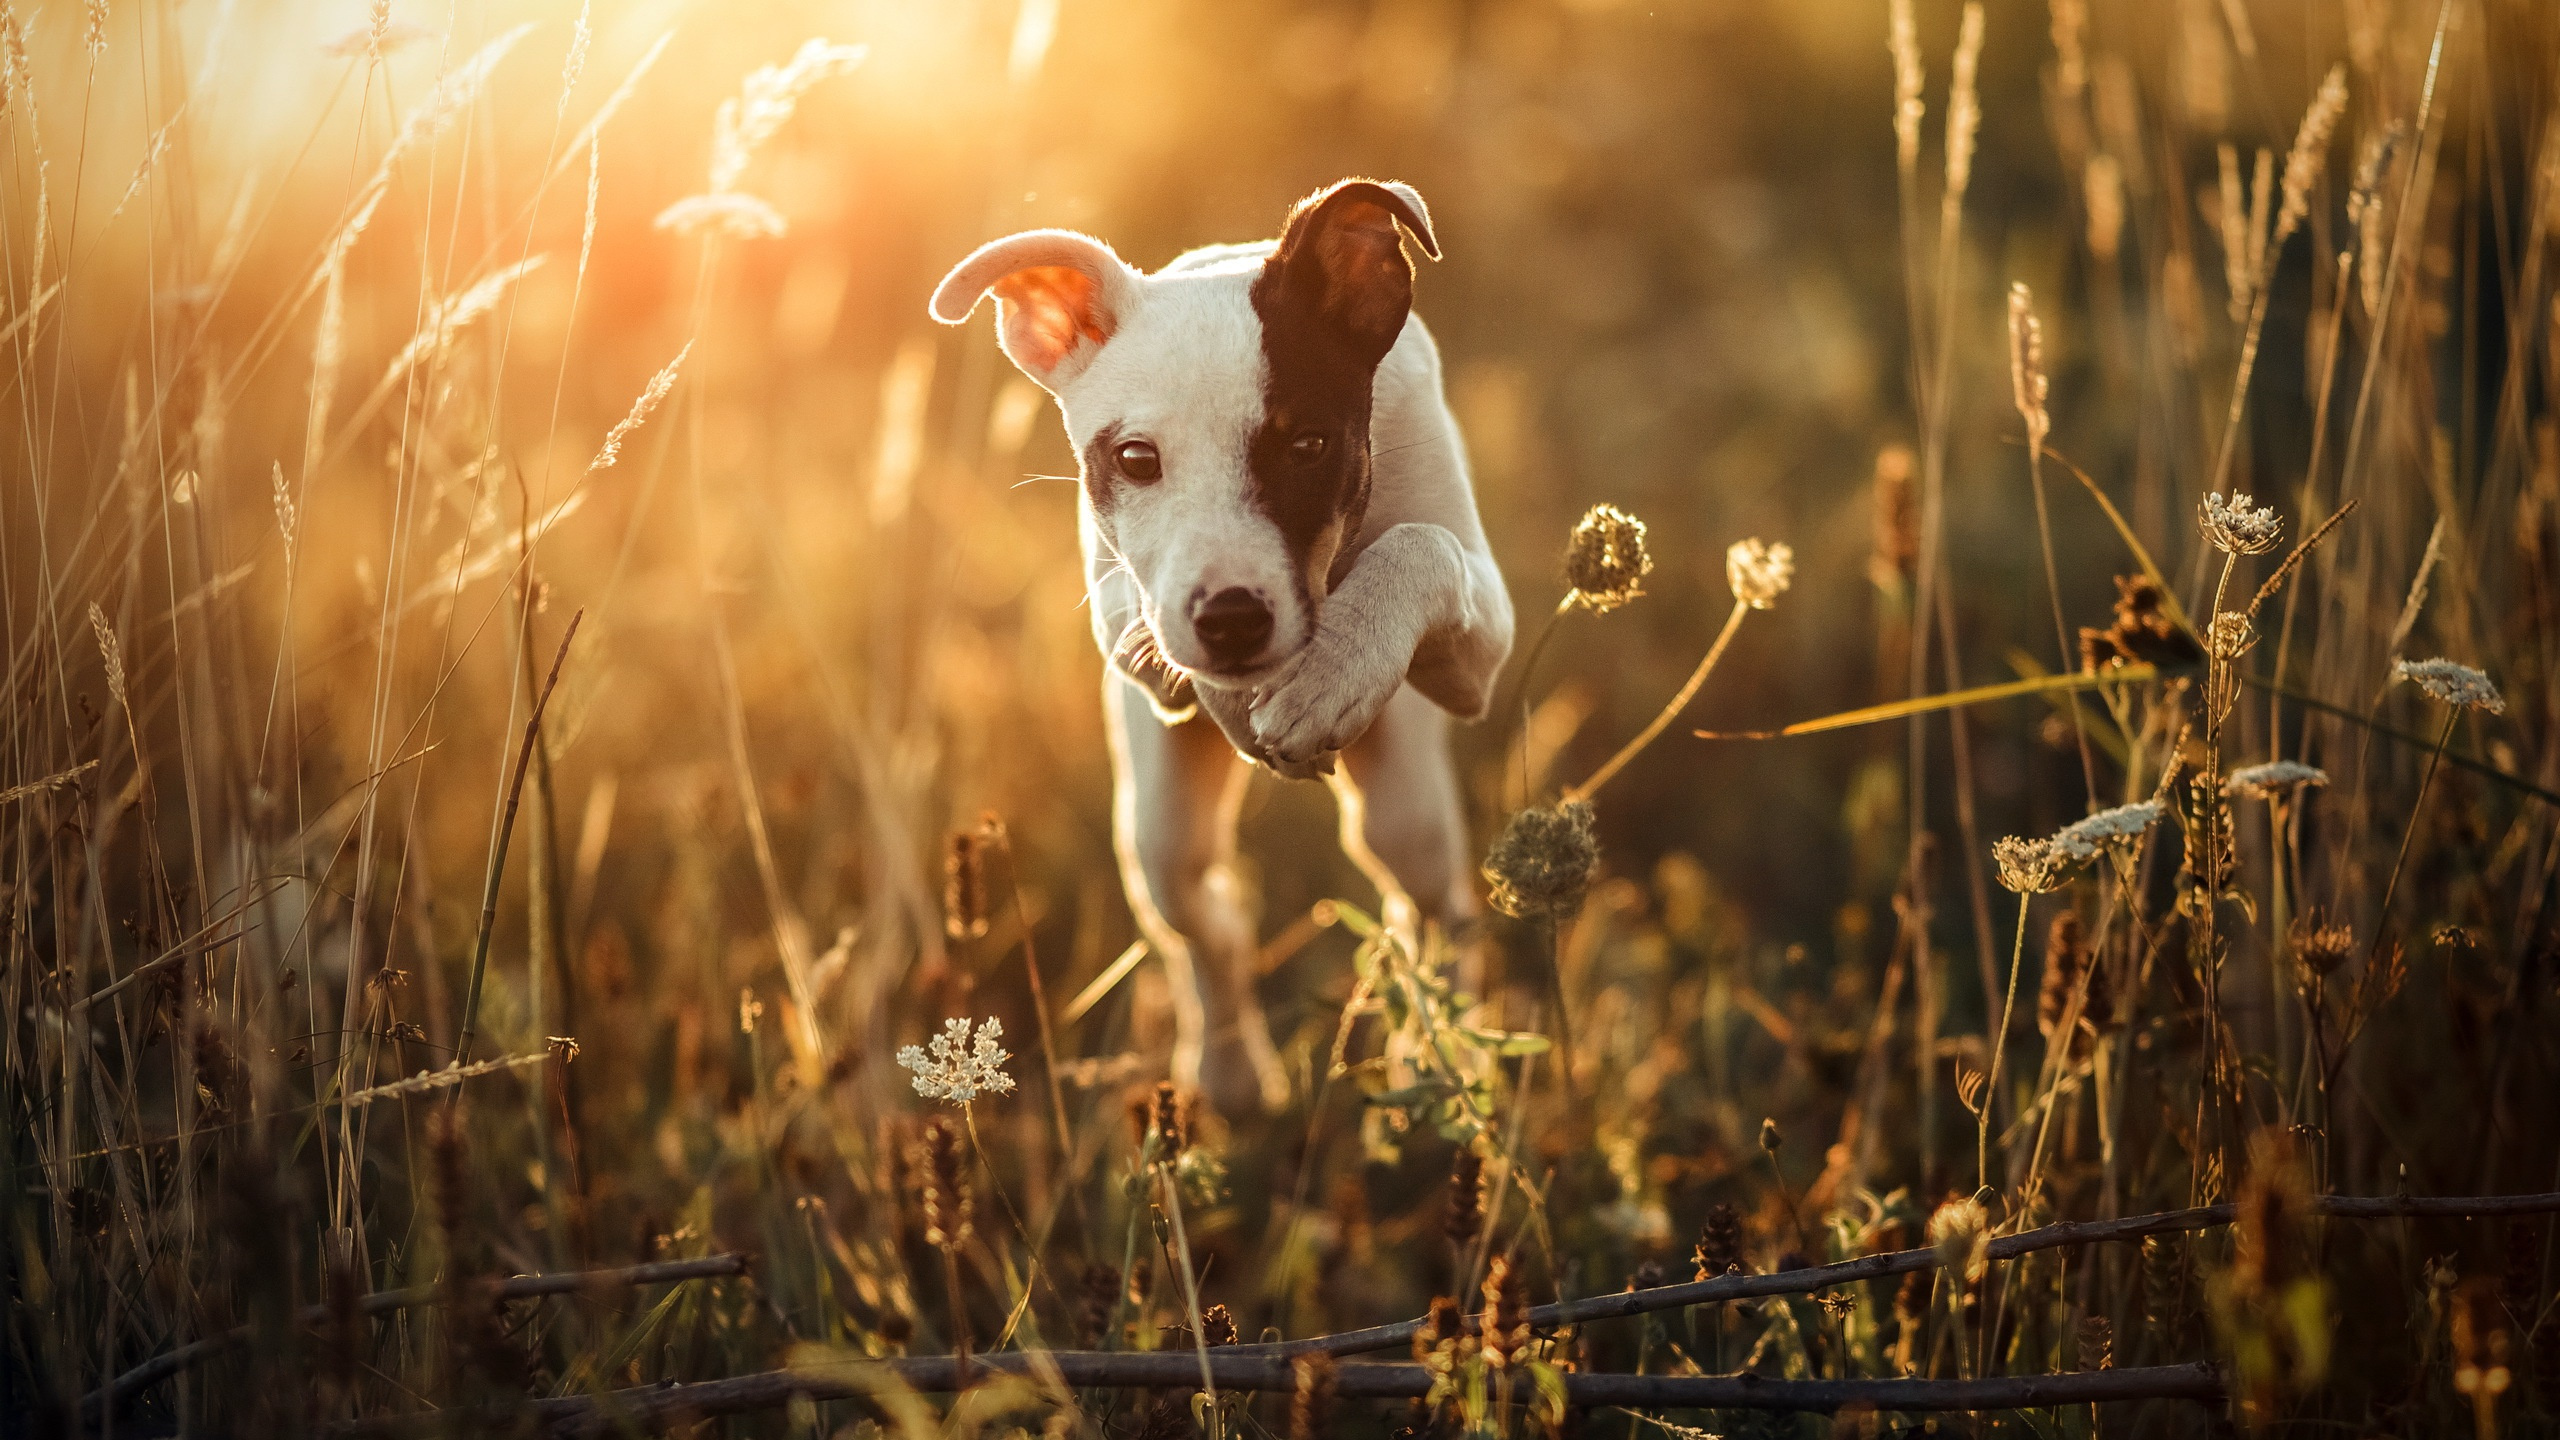 White and Brown Short Coat Small Dog on Green Grass Field During Daytime. Wallpaper in 2560x1440 Resolution